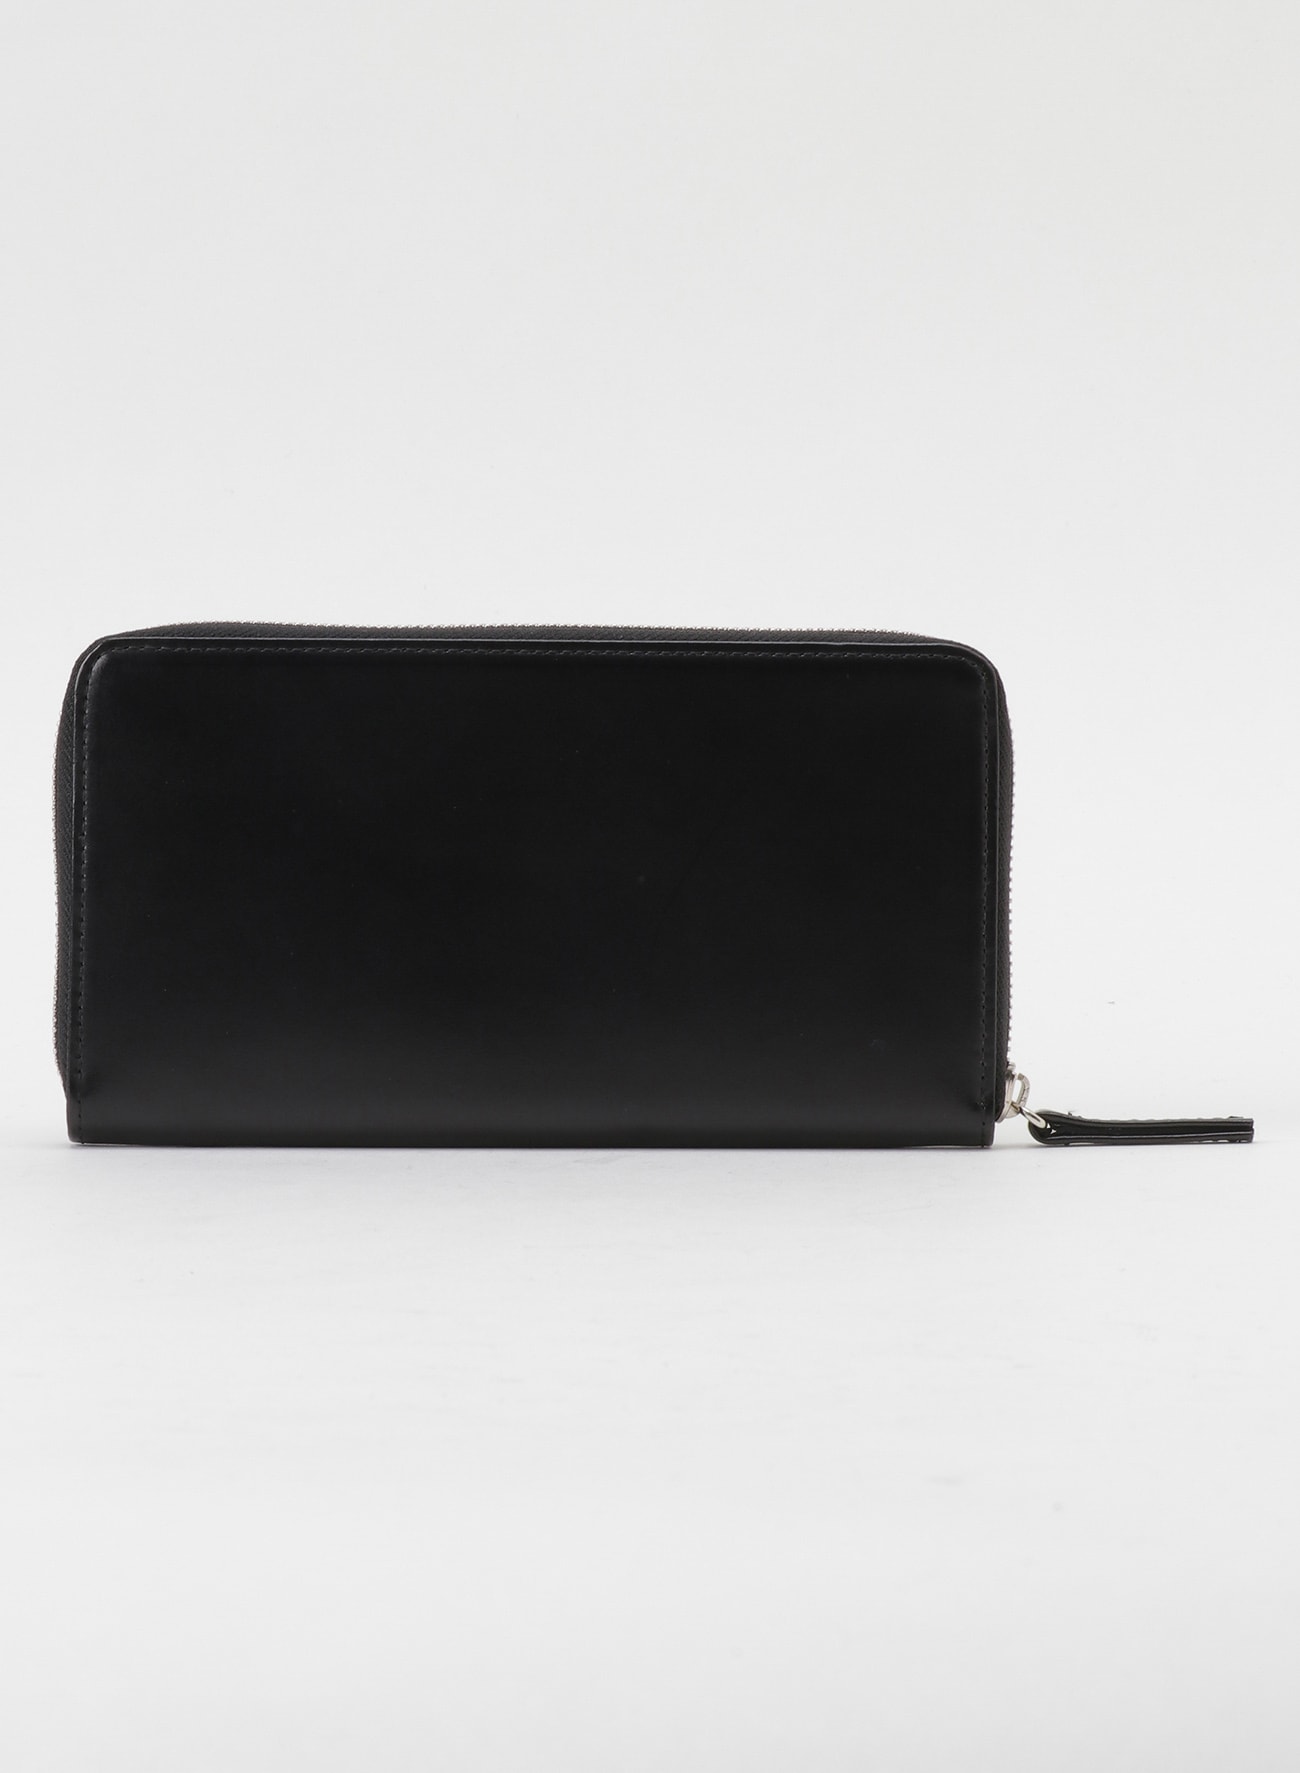 LARGE GLOSSY LEATHER WALLET